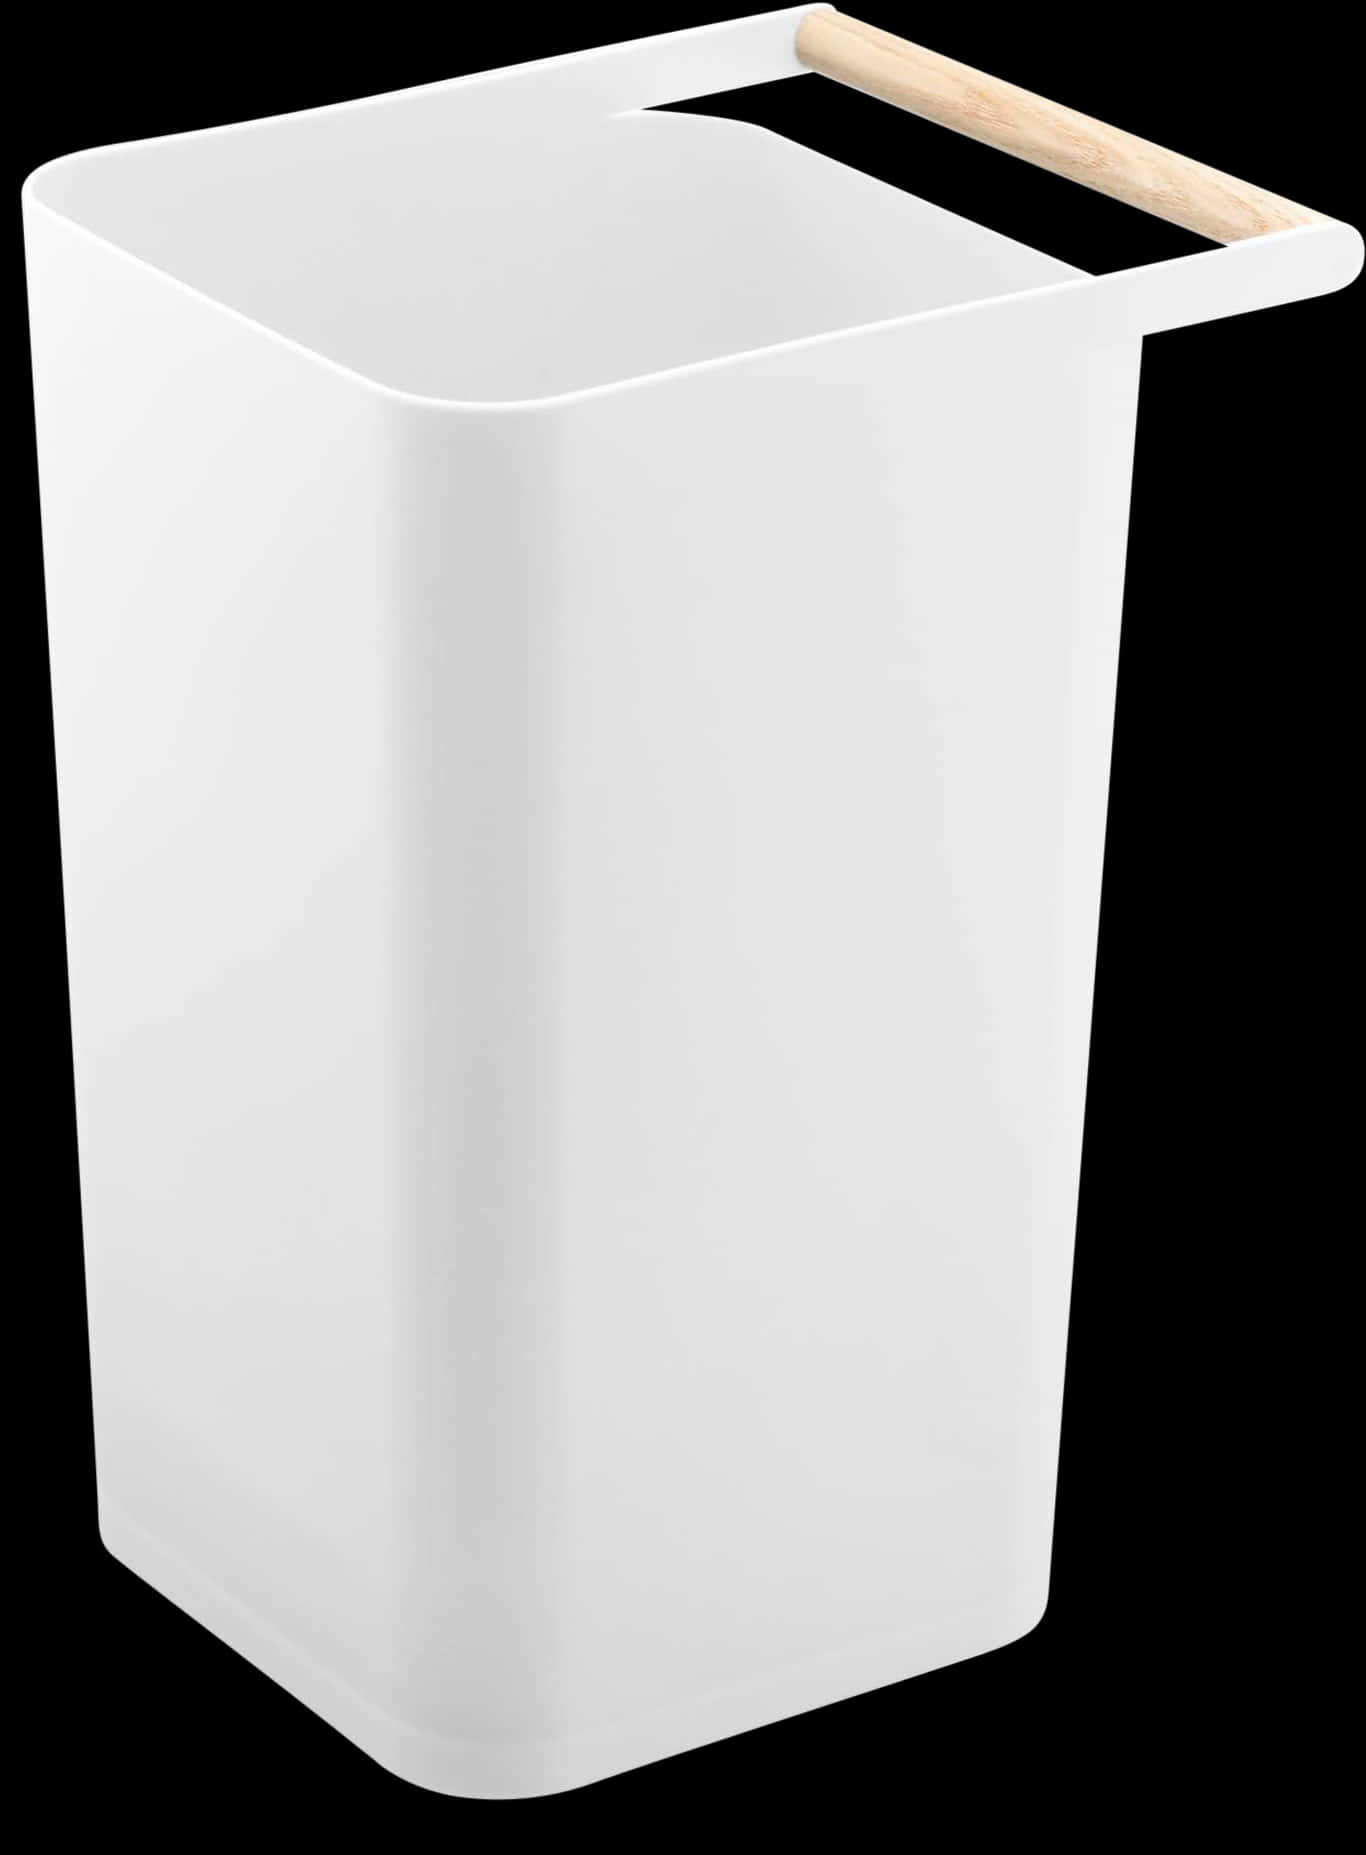 A White Plastic Container With A Handle